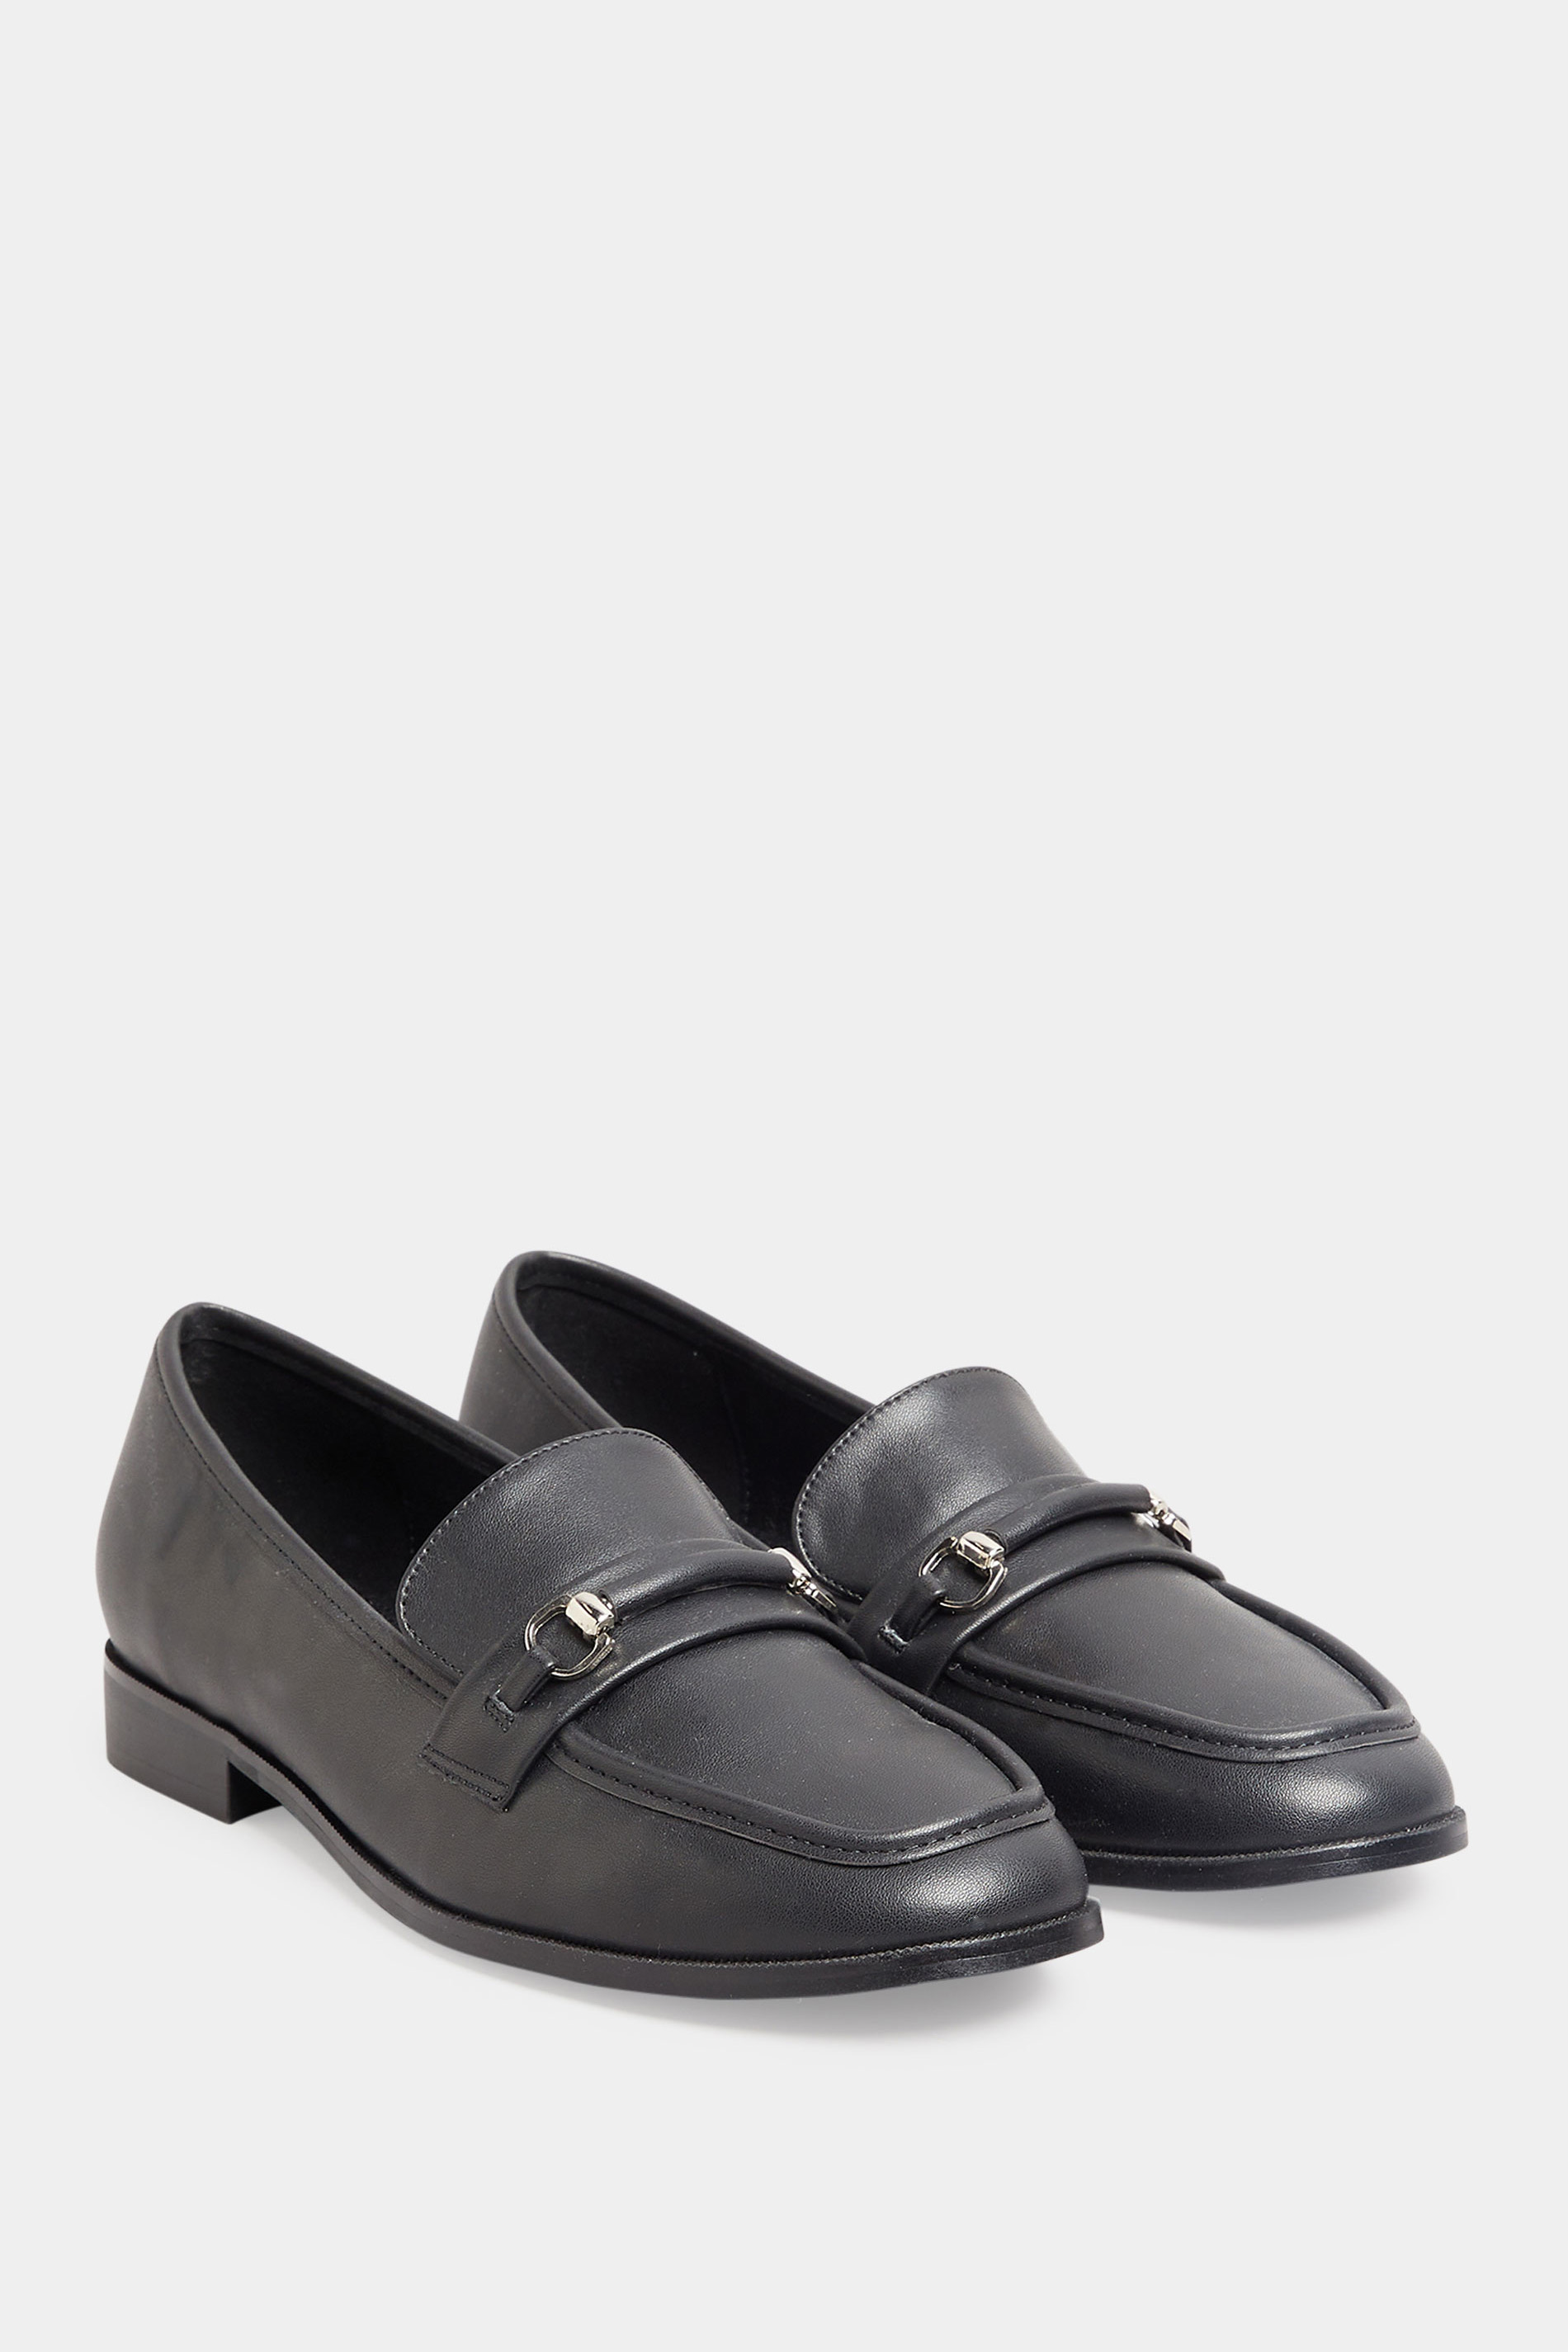 LTS Black Saddle Loafers In Standard Fit | Long Tall Sally  2